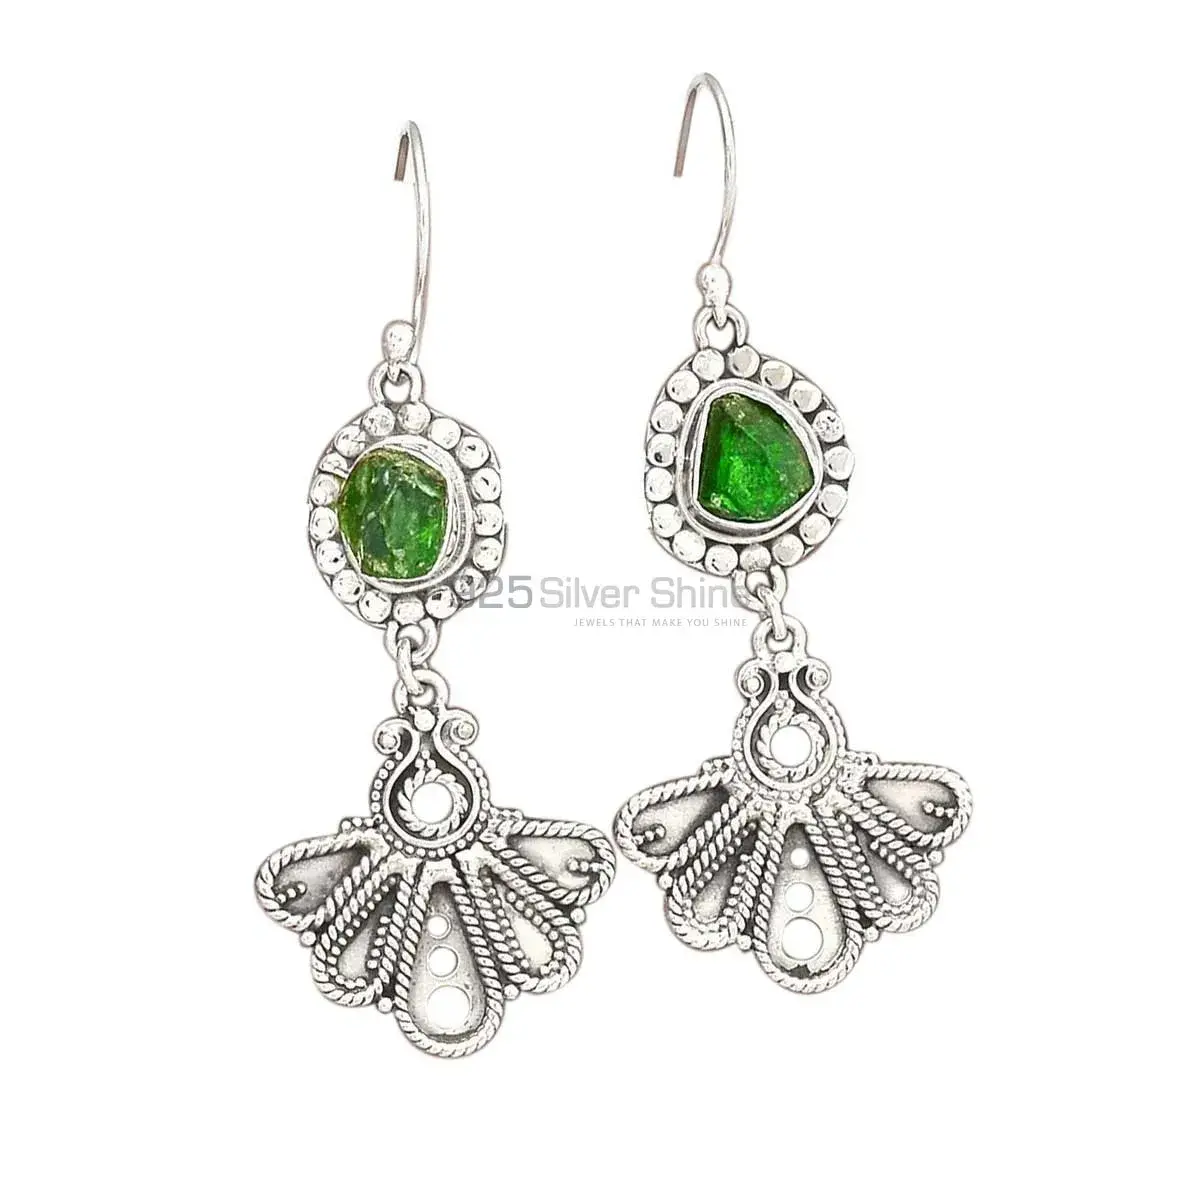 925 Sterling Silver Handmade Earrings Manufacturer In Chrome Diopside Gemstone Jewelry 925SE3094